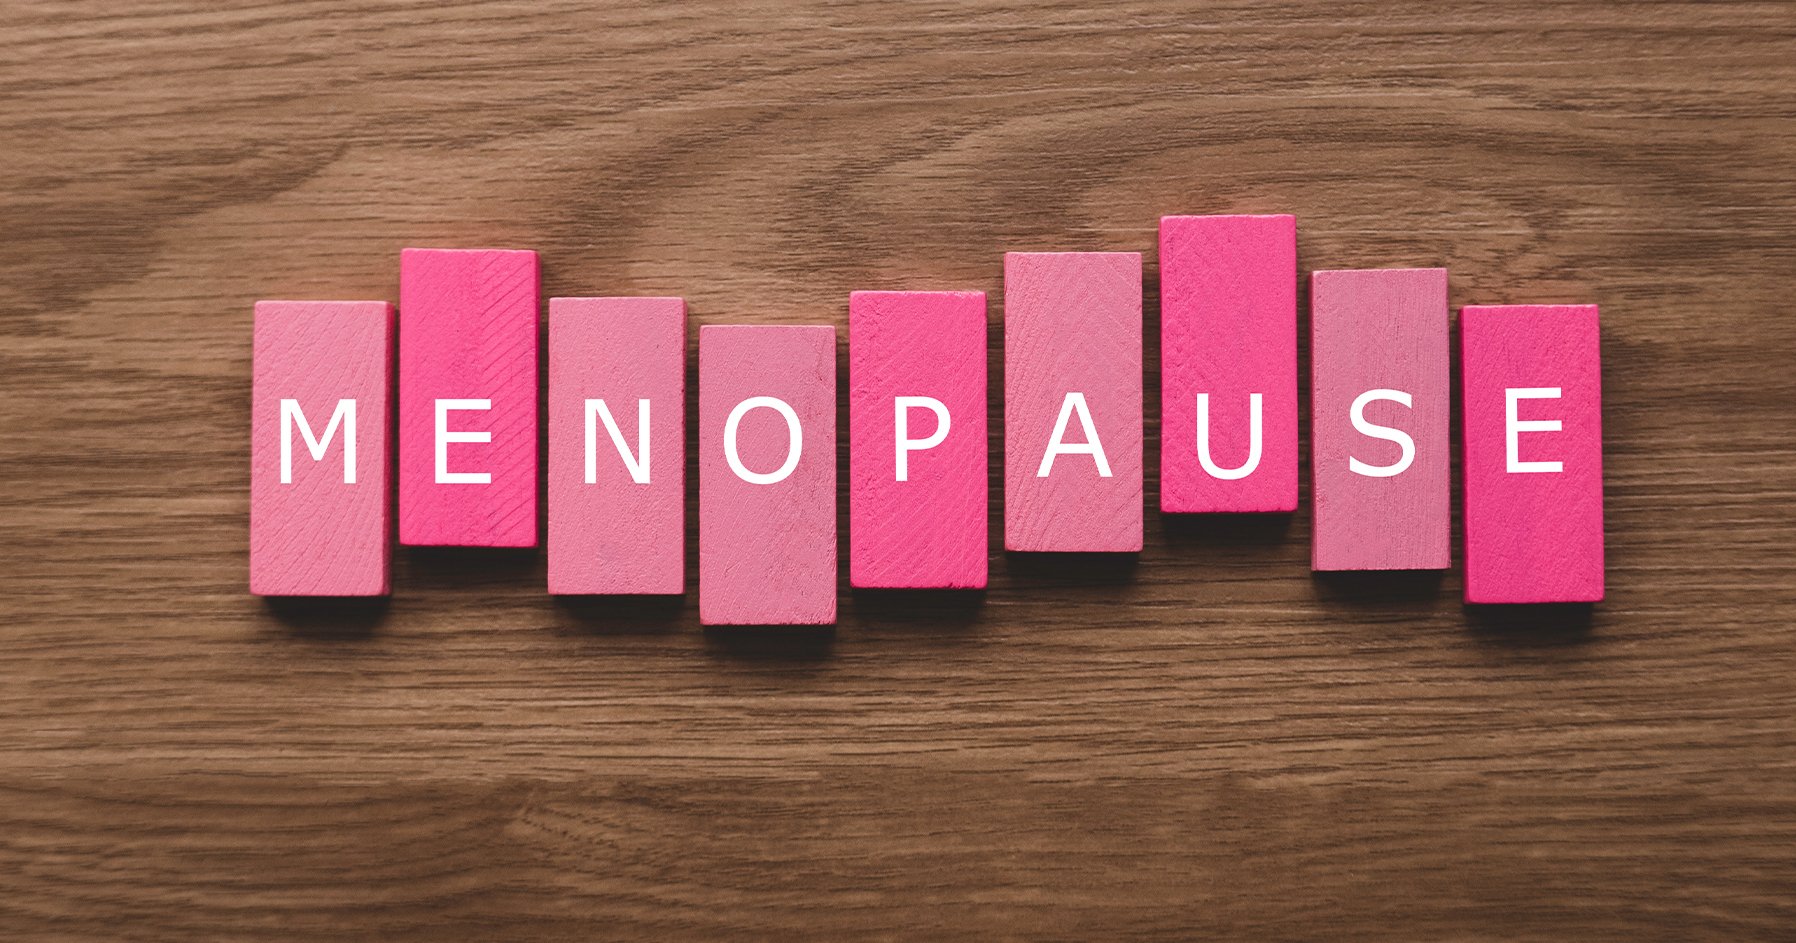 Image of tiles spelling out the word menopause.